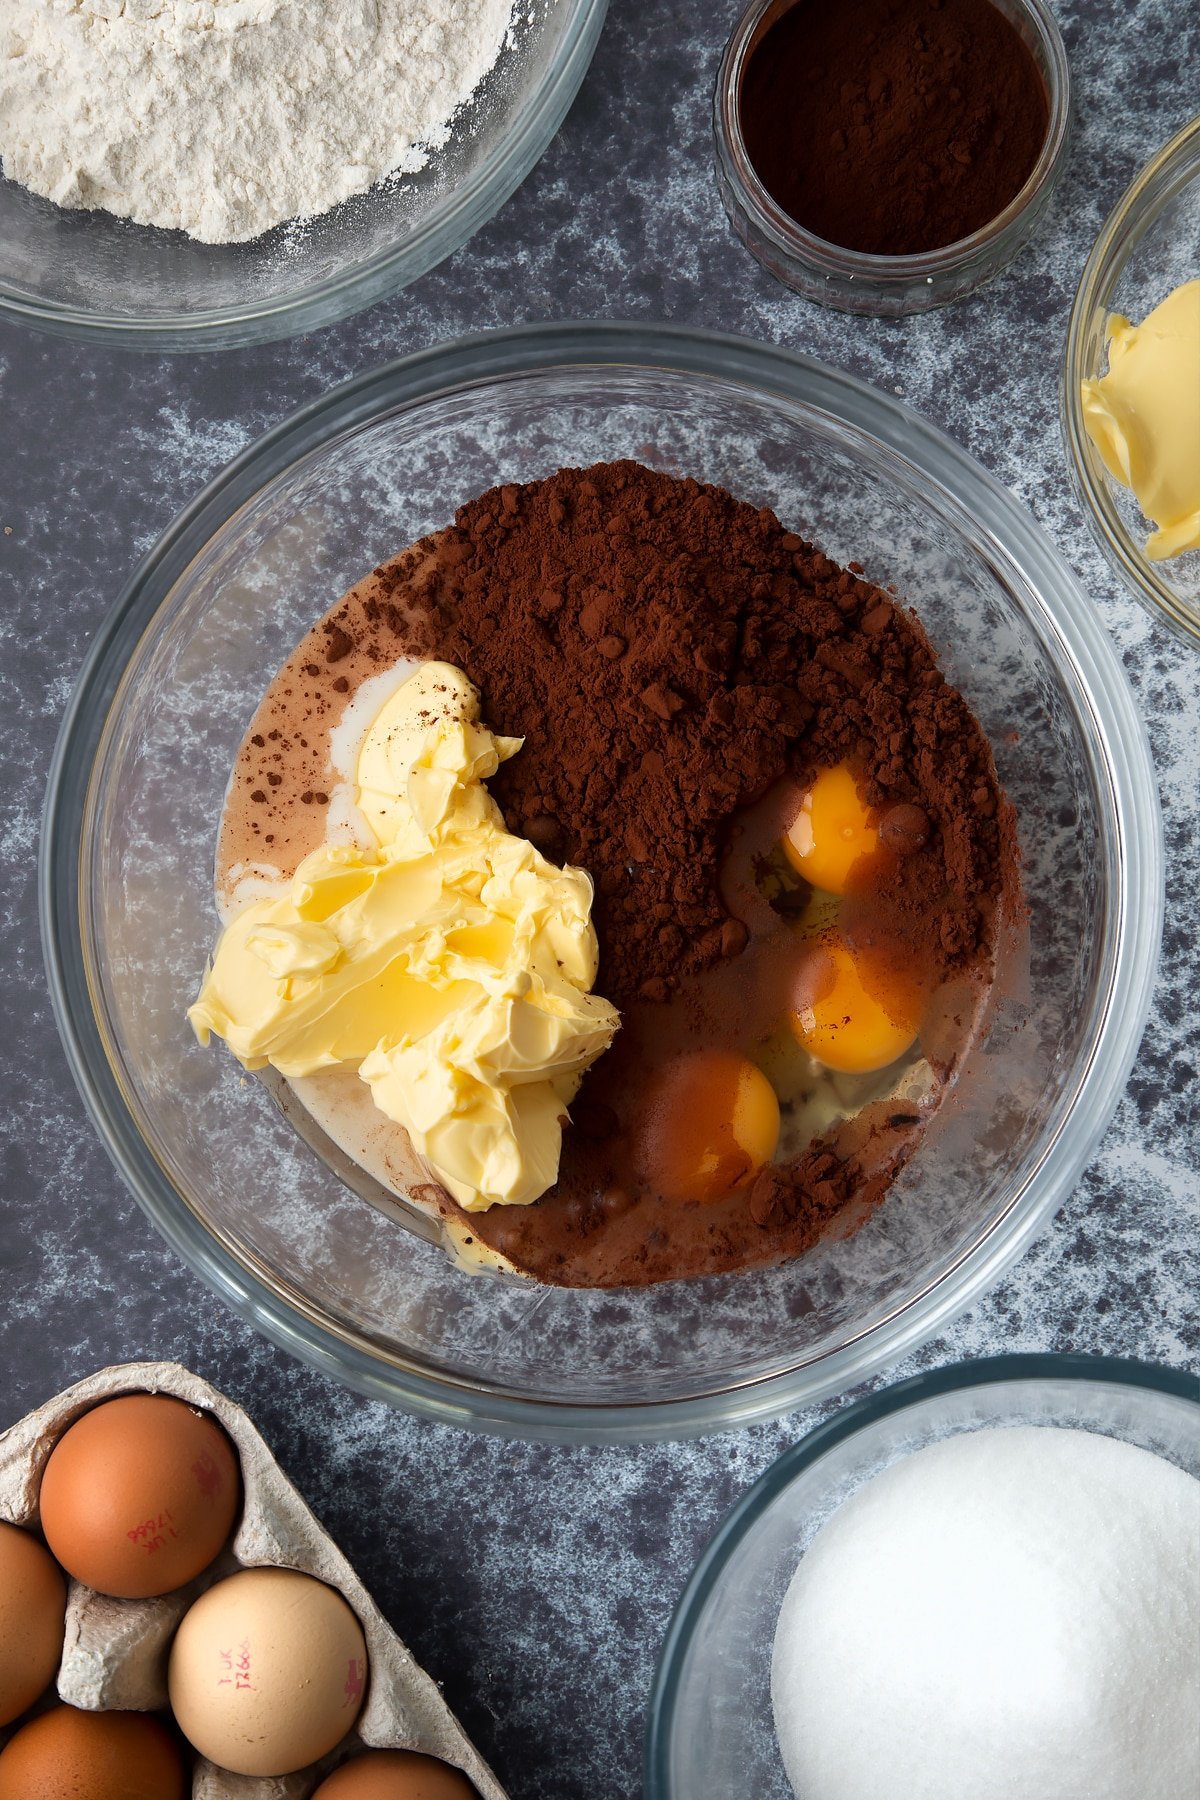 Margarine, sugar, eggs, vanilla and milk in a large mixing bowl. Ingredients to make spider web cupcakes surround the bowl.